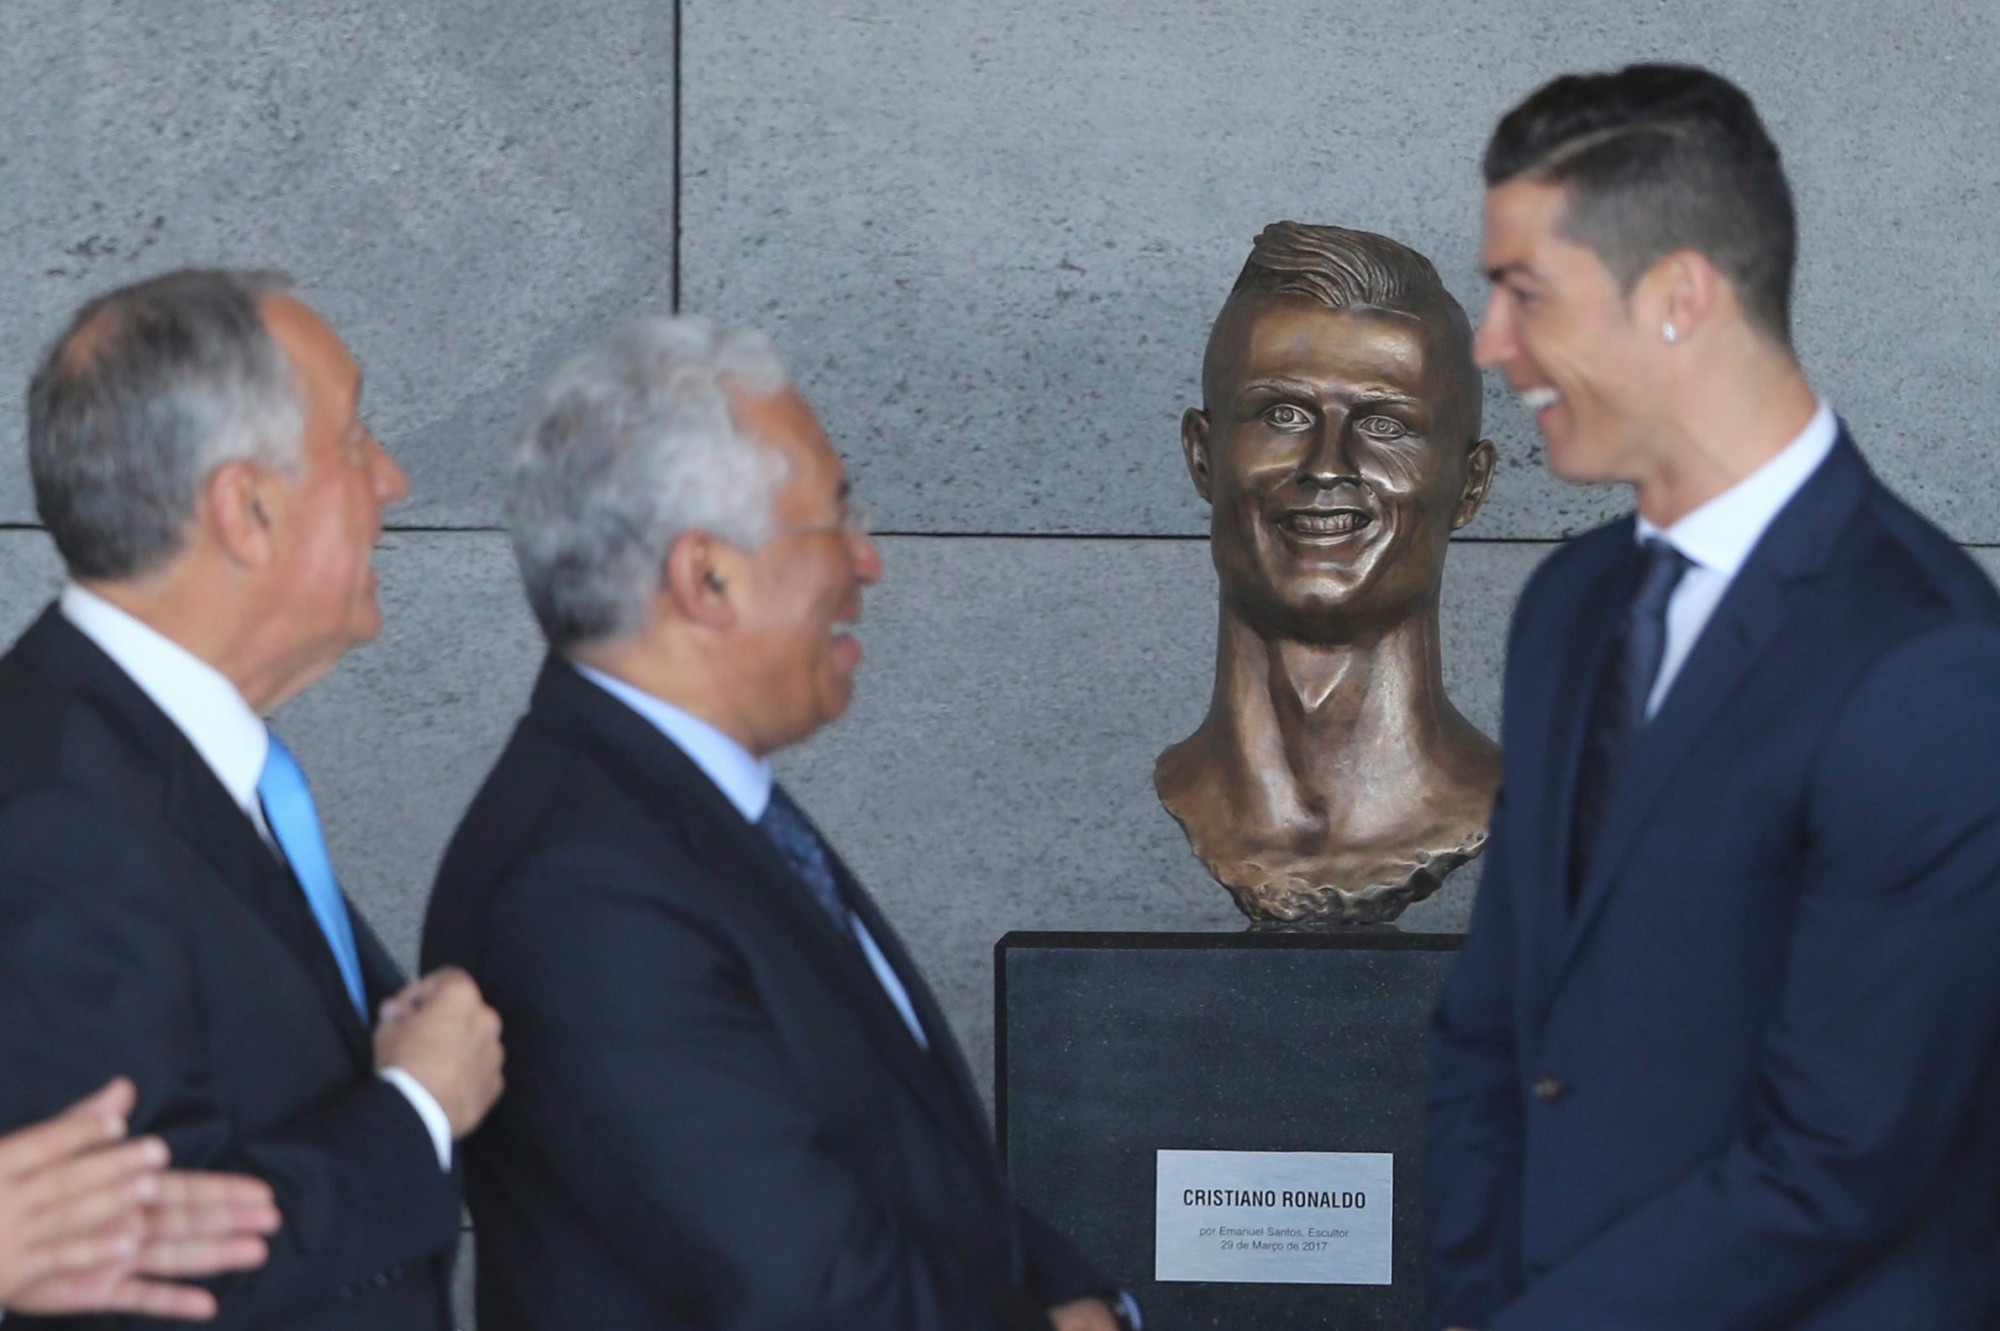 Portuguese president Marcelo Rebelo de Sousa, left, Portuguese Prime Minister Antonio Costa, 2nd left and Real Madrid's Cristiano Ronaldo stand next to a bust of the player at the Madeira international airport outside Funchal, the capital of Madeira island, Portugal, Wednesday March 29, 2017. Madeira International Airport has been renamed after local soccer star Cristiano Ronaldo on Wednesday during a ceremony, with family, at the airport outside his Funchal hometown. (AP Photo/Armando Franca) APTOPIX Portugal Cristiano Ronaldo Airport